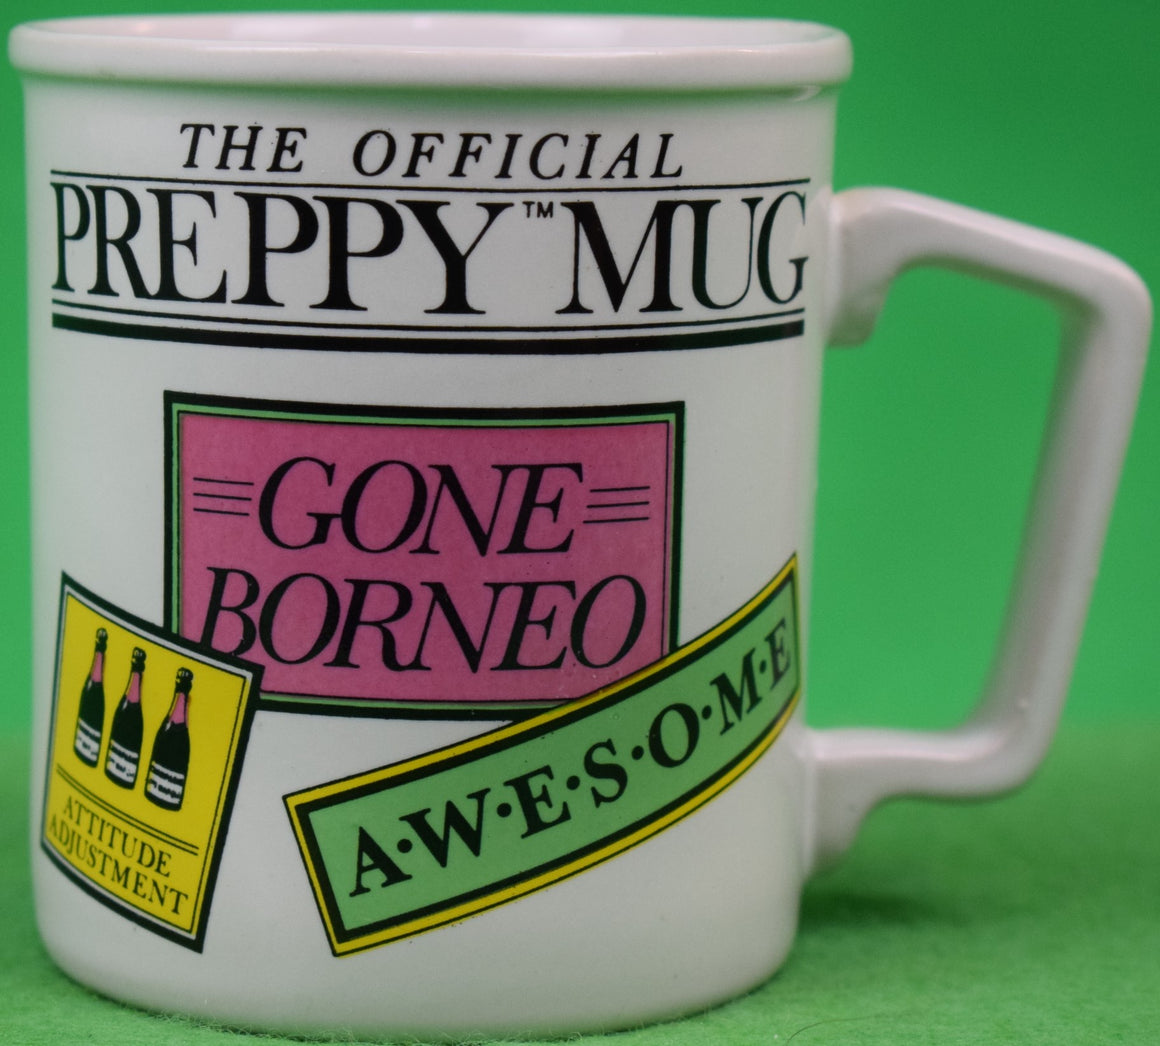 "The Official Preppy Gone Borneo/ Awesome/ Attitude Adjustment Mug" (SOLD)